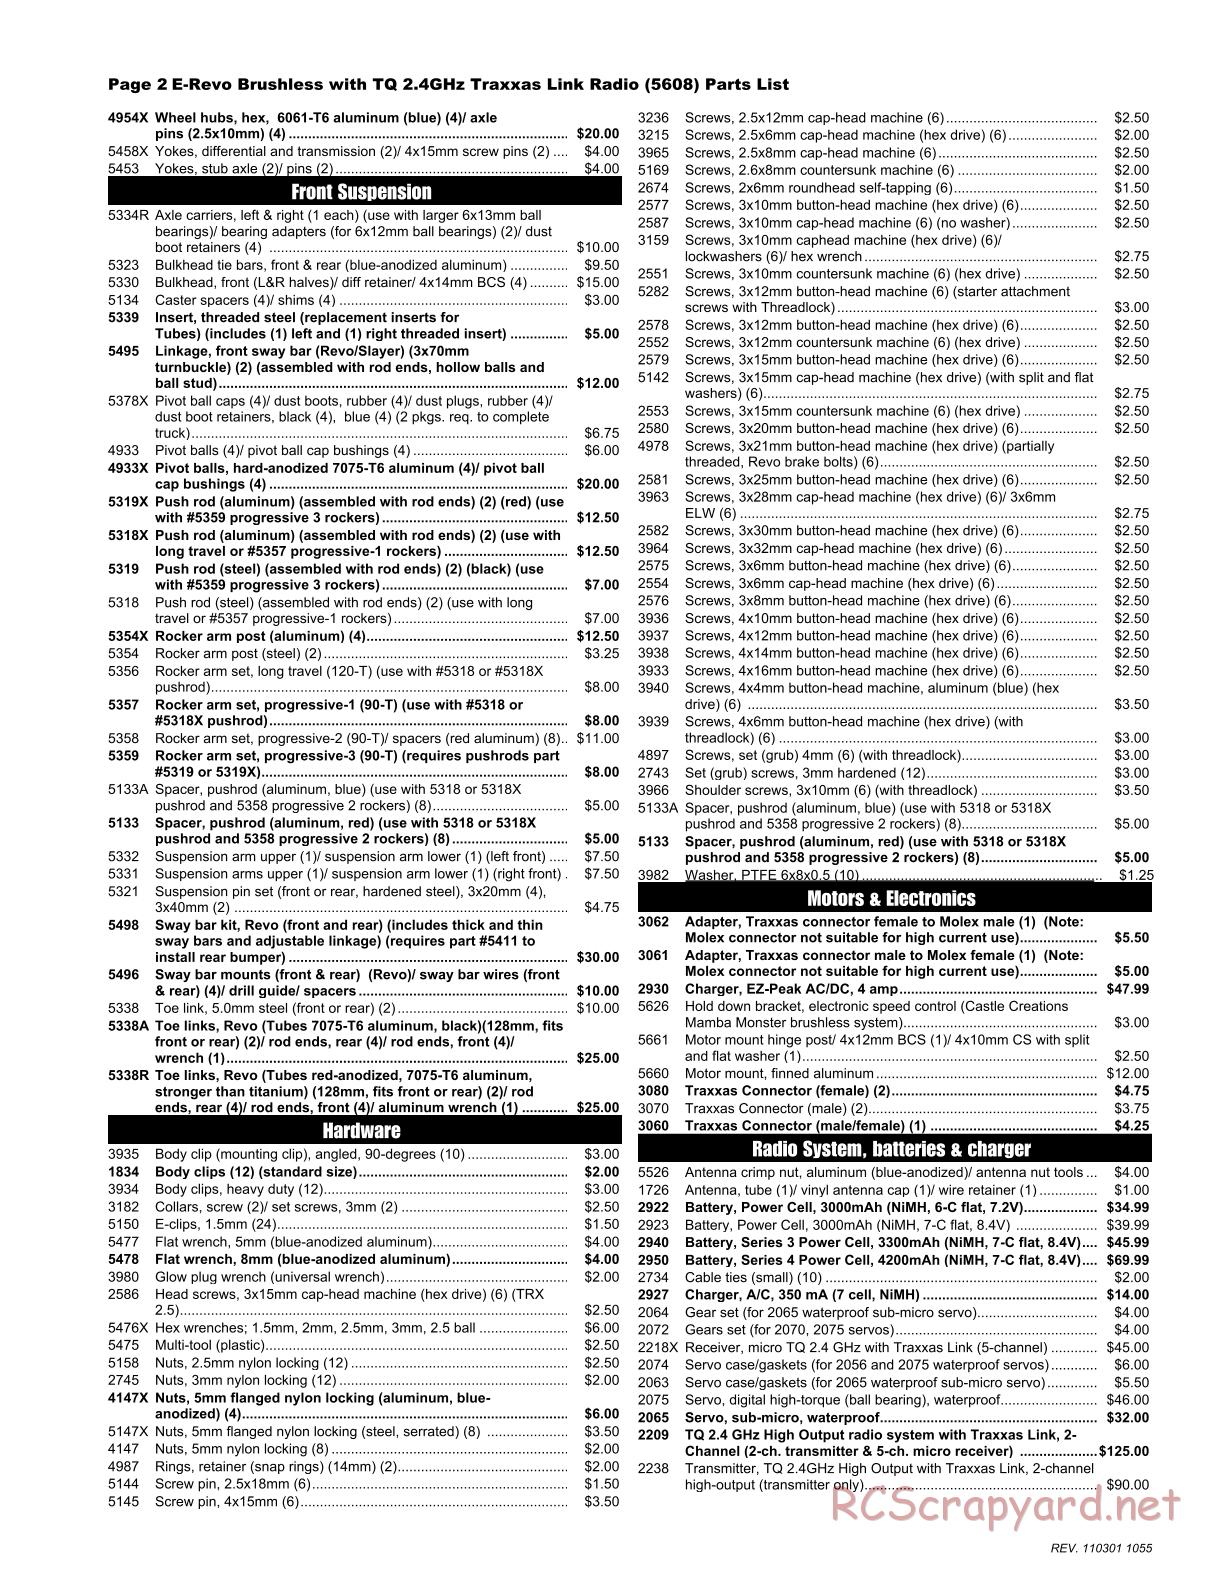 Traxxas - E-Revo Brushless (2009) - Parts List - Page 2